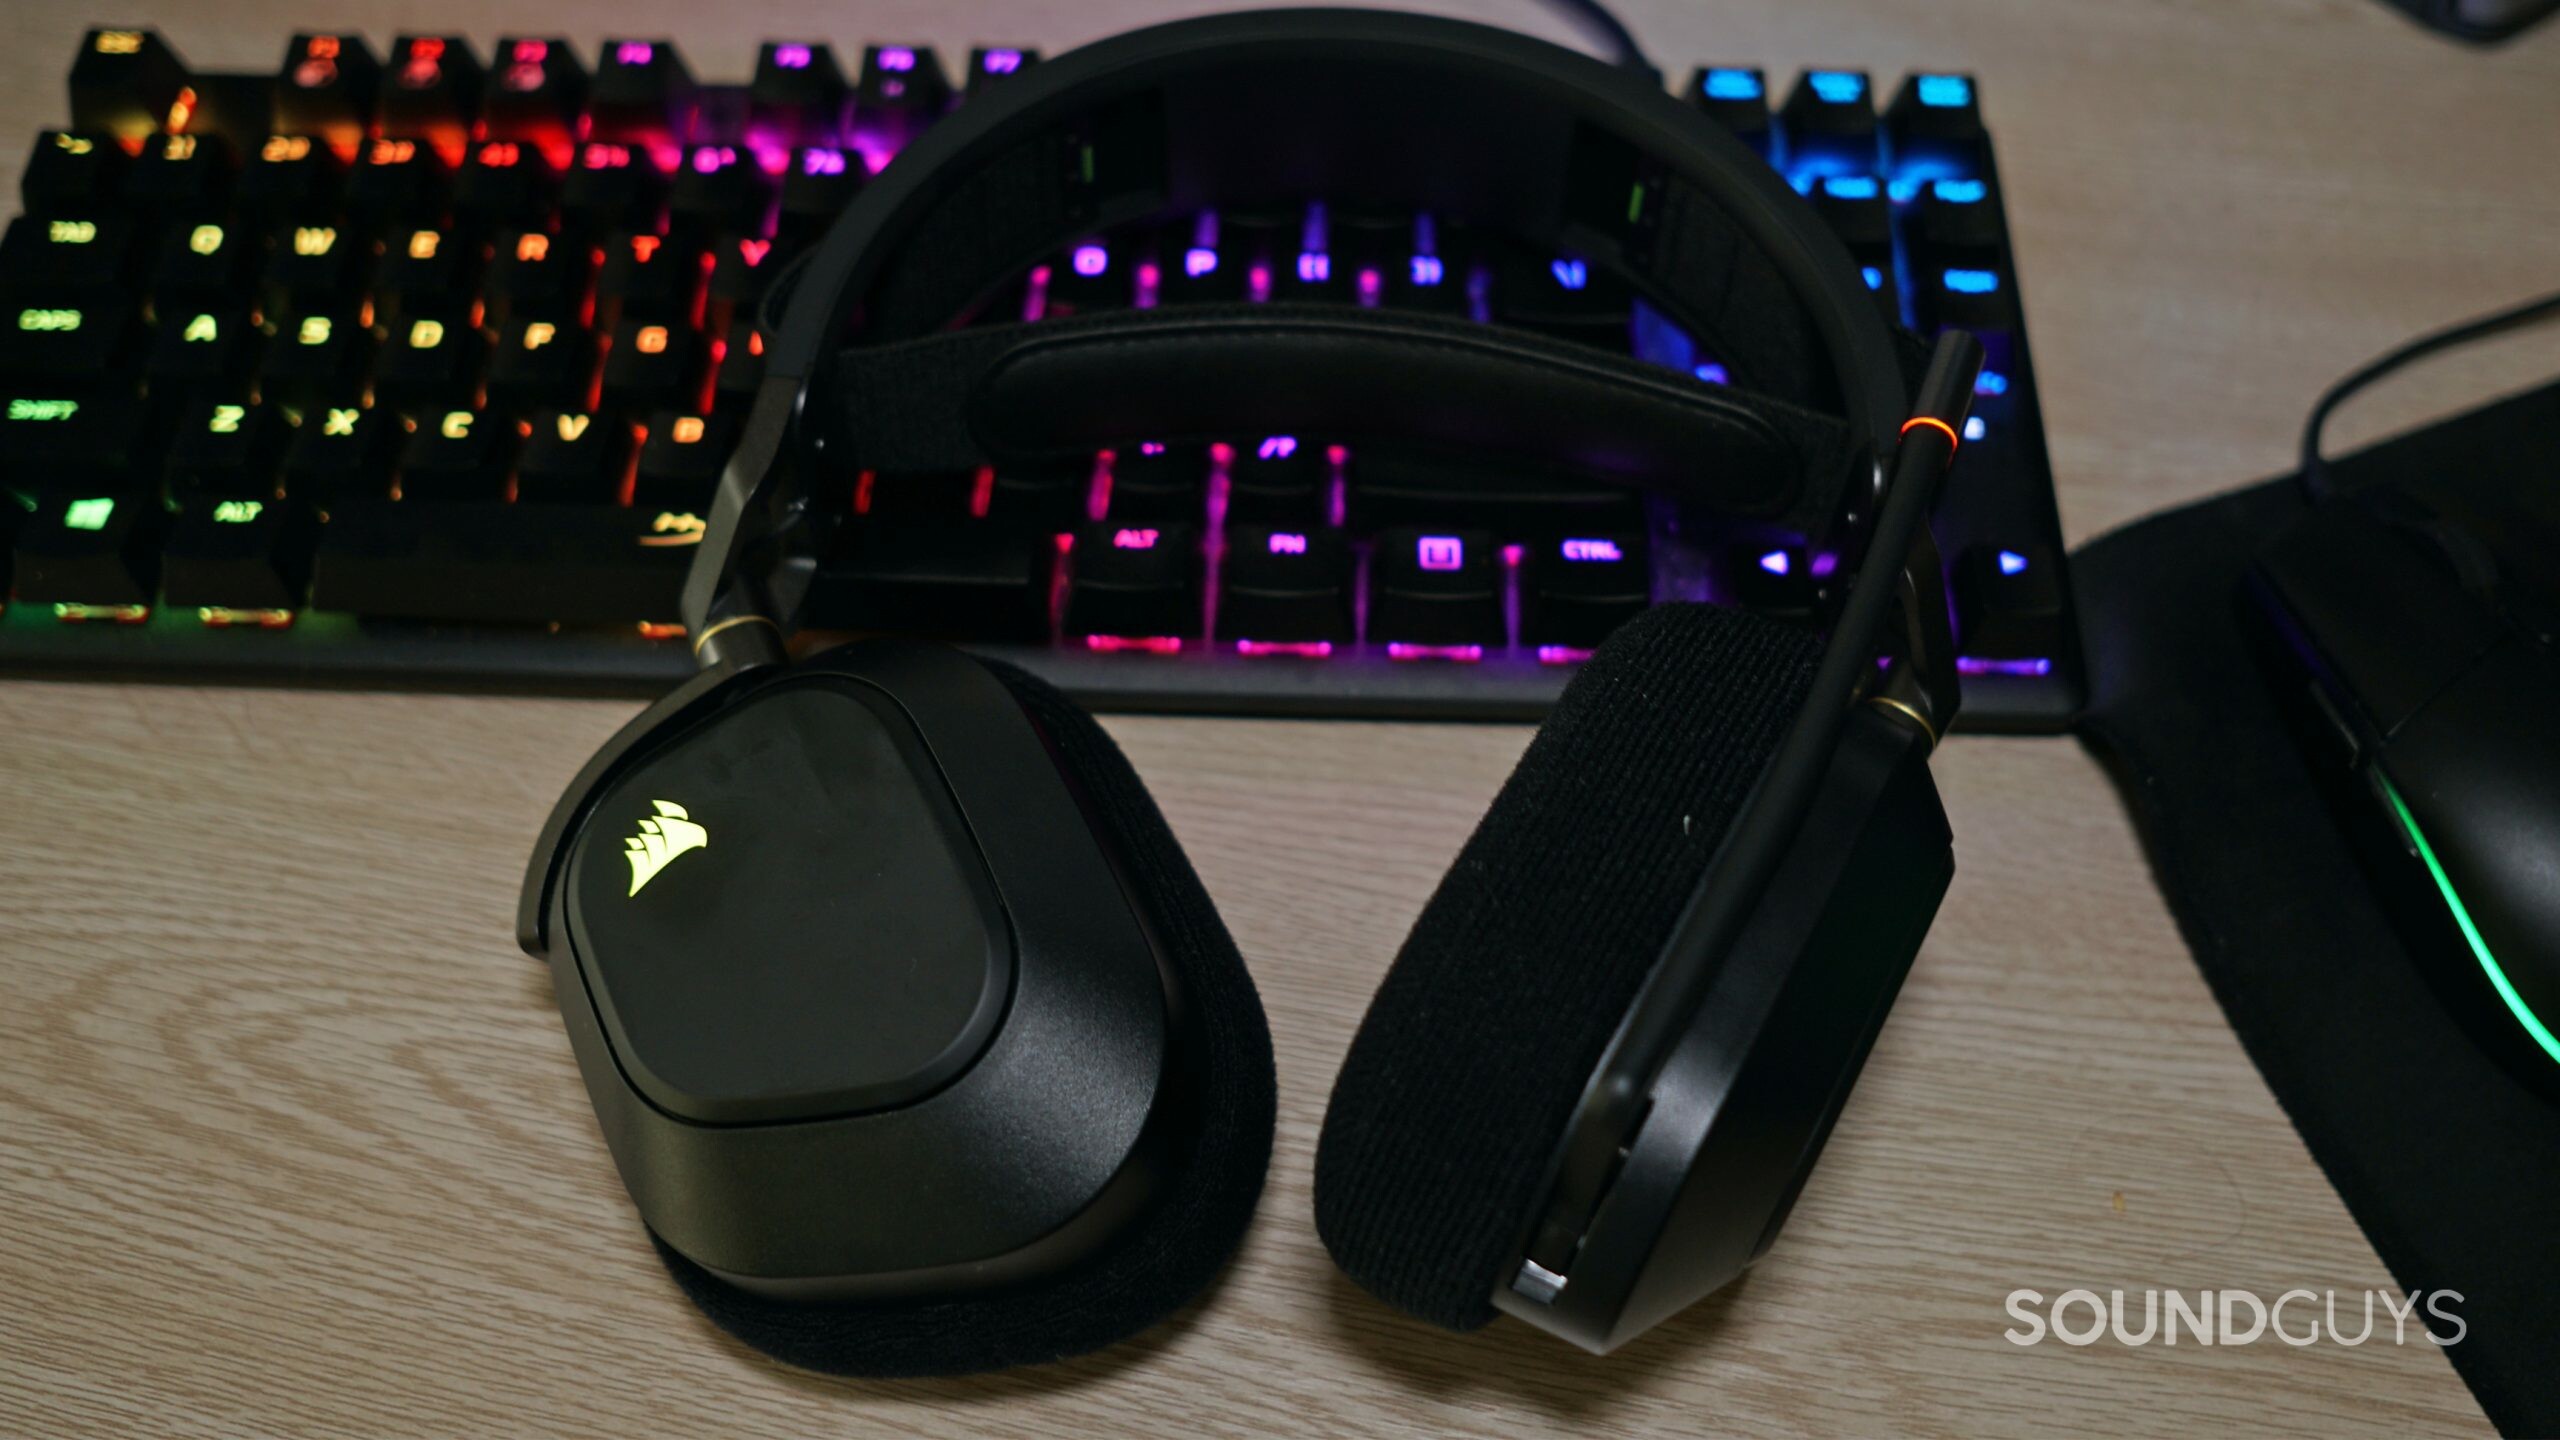 The Corsair HS80 RGB Wireless lays on a desk on top of a HyperX mechanical gaming keyboard, next to a Logitech gaming mouse